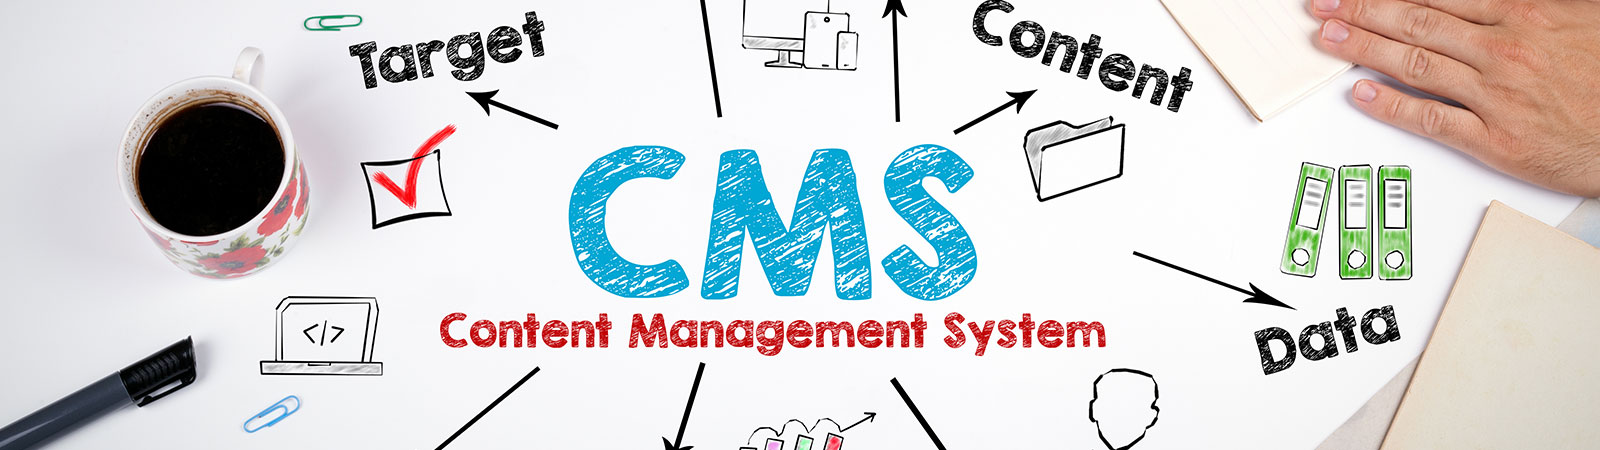 cms help with icons and words content management system